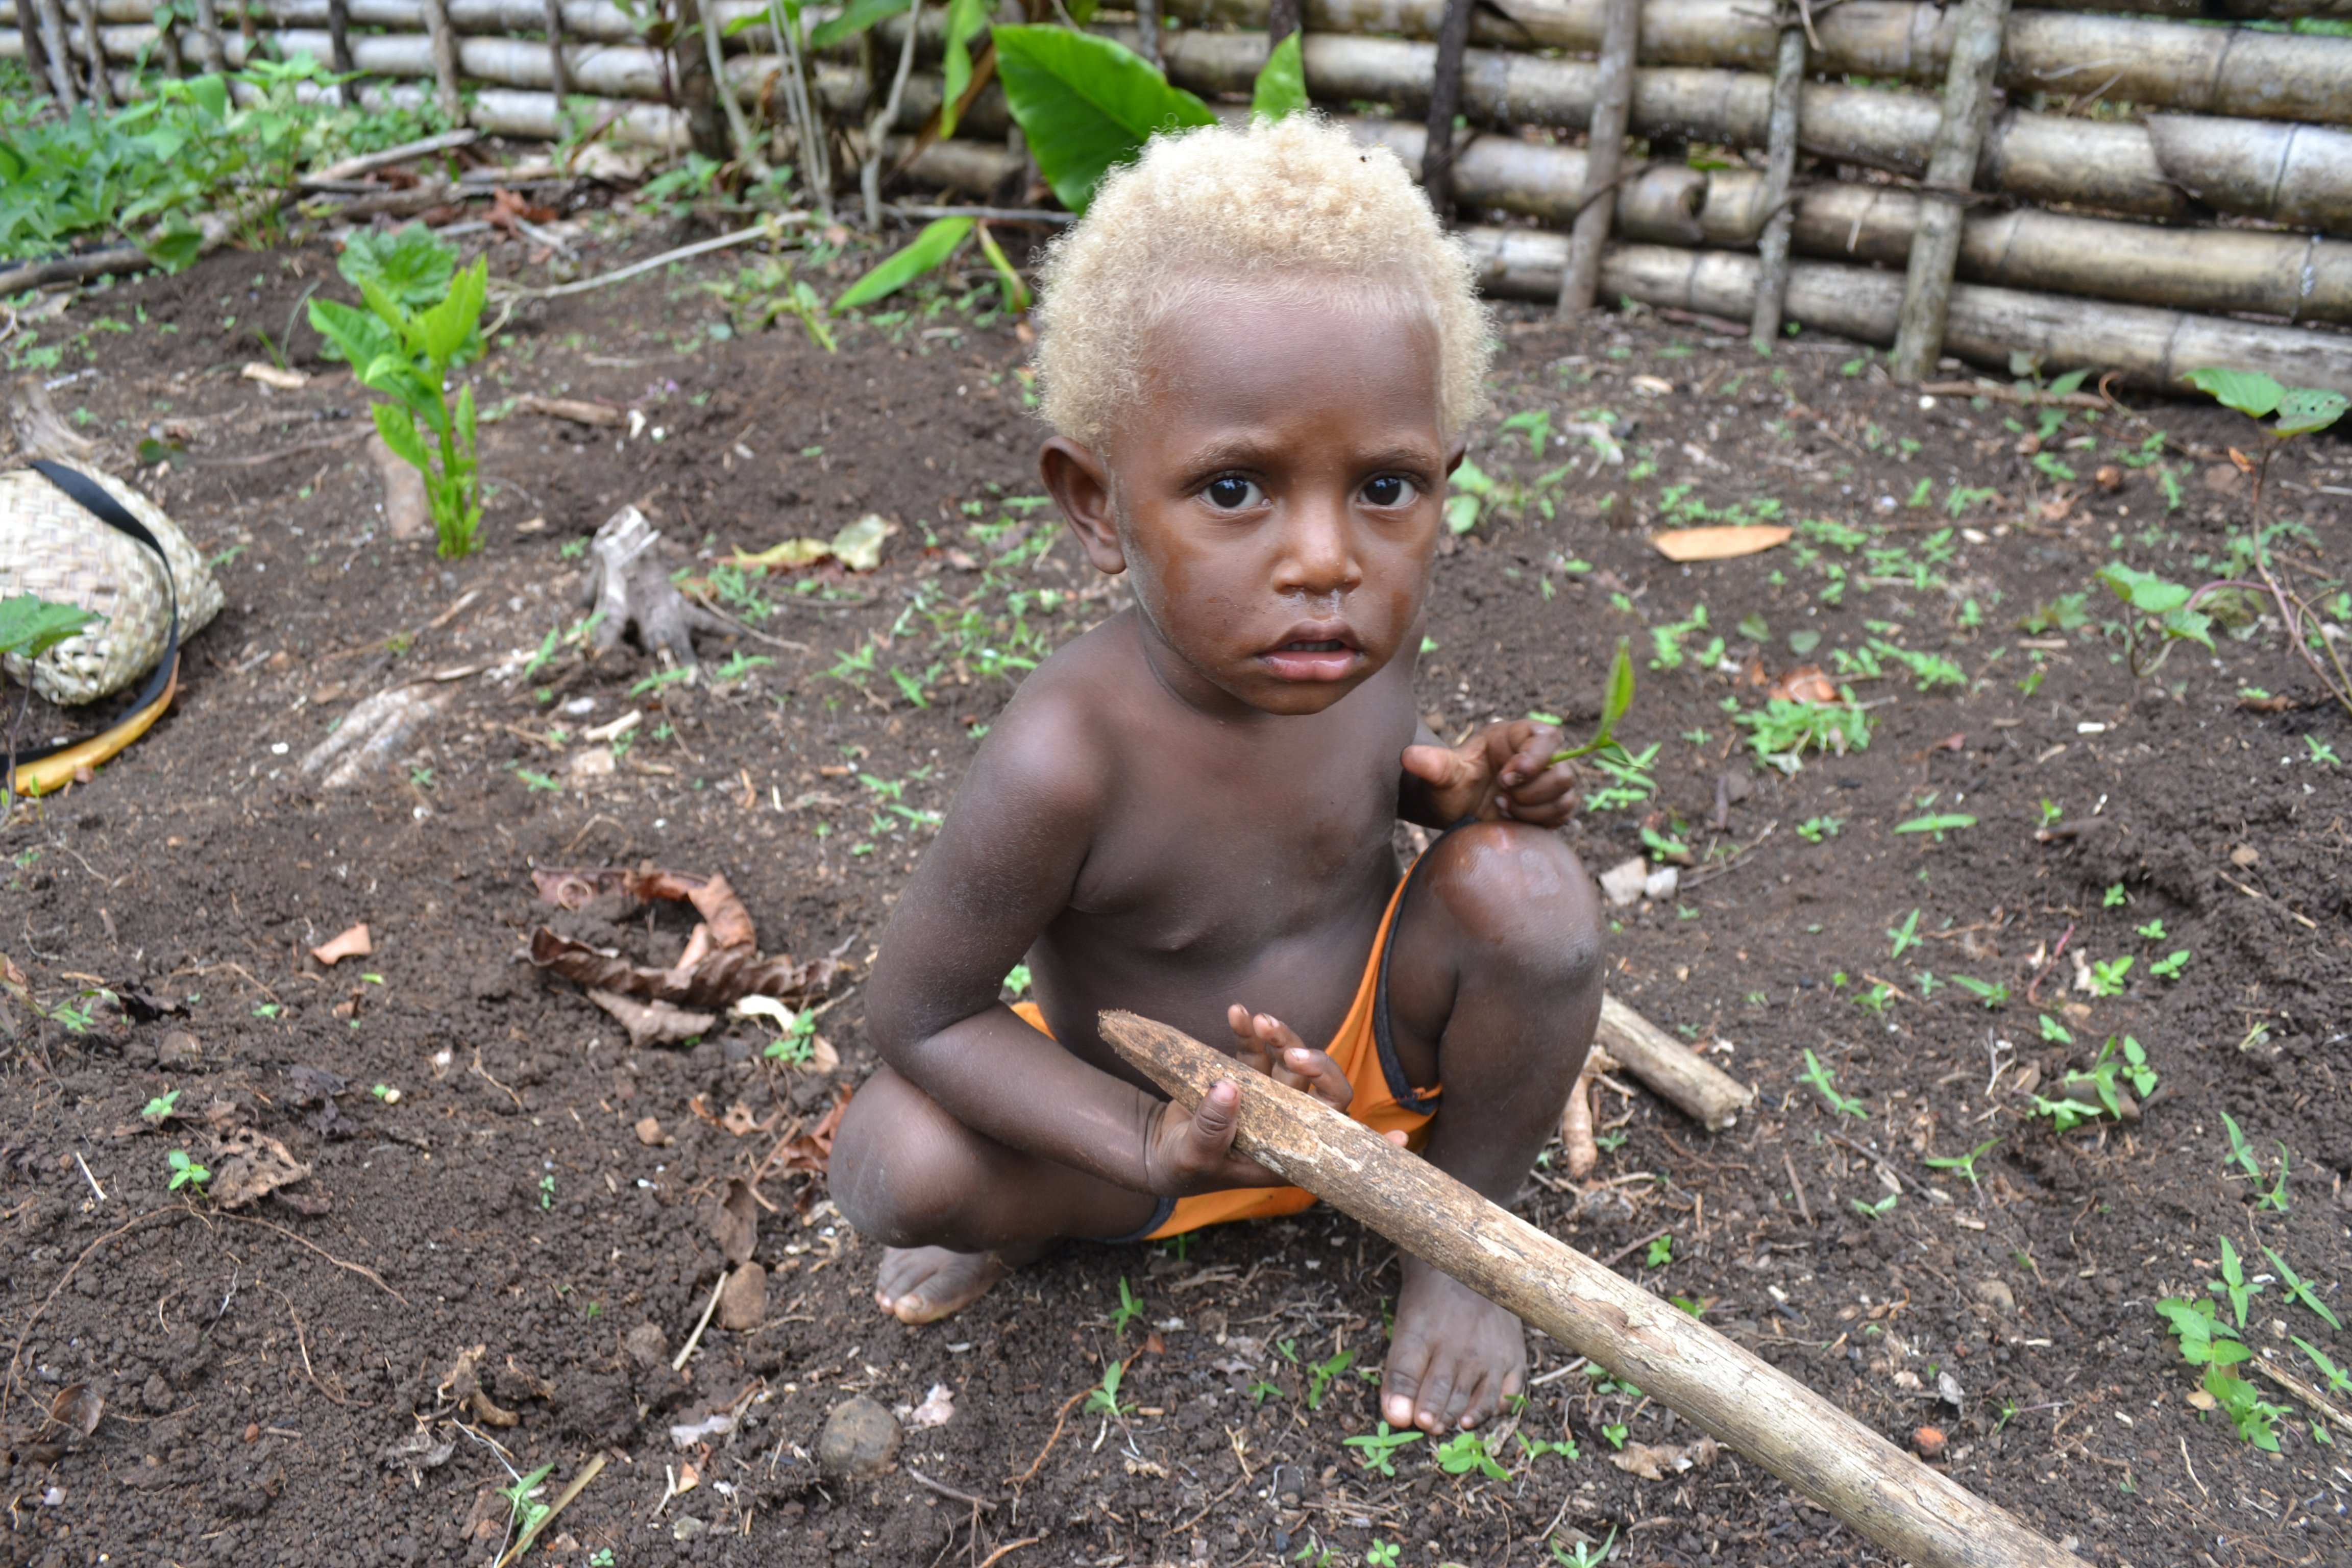 A young child in Komalu where villagers fear deep sea mining may disrupt traditional ways of life. (Credit: Mike Casey) 